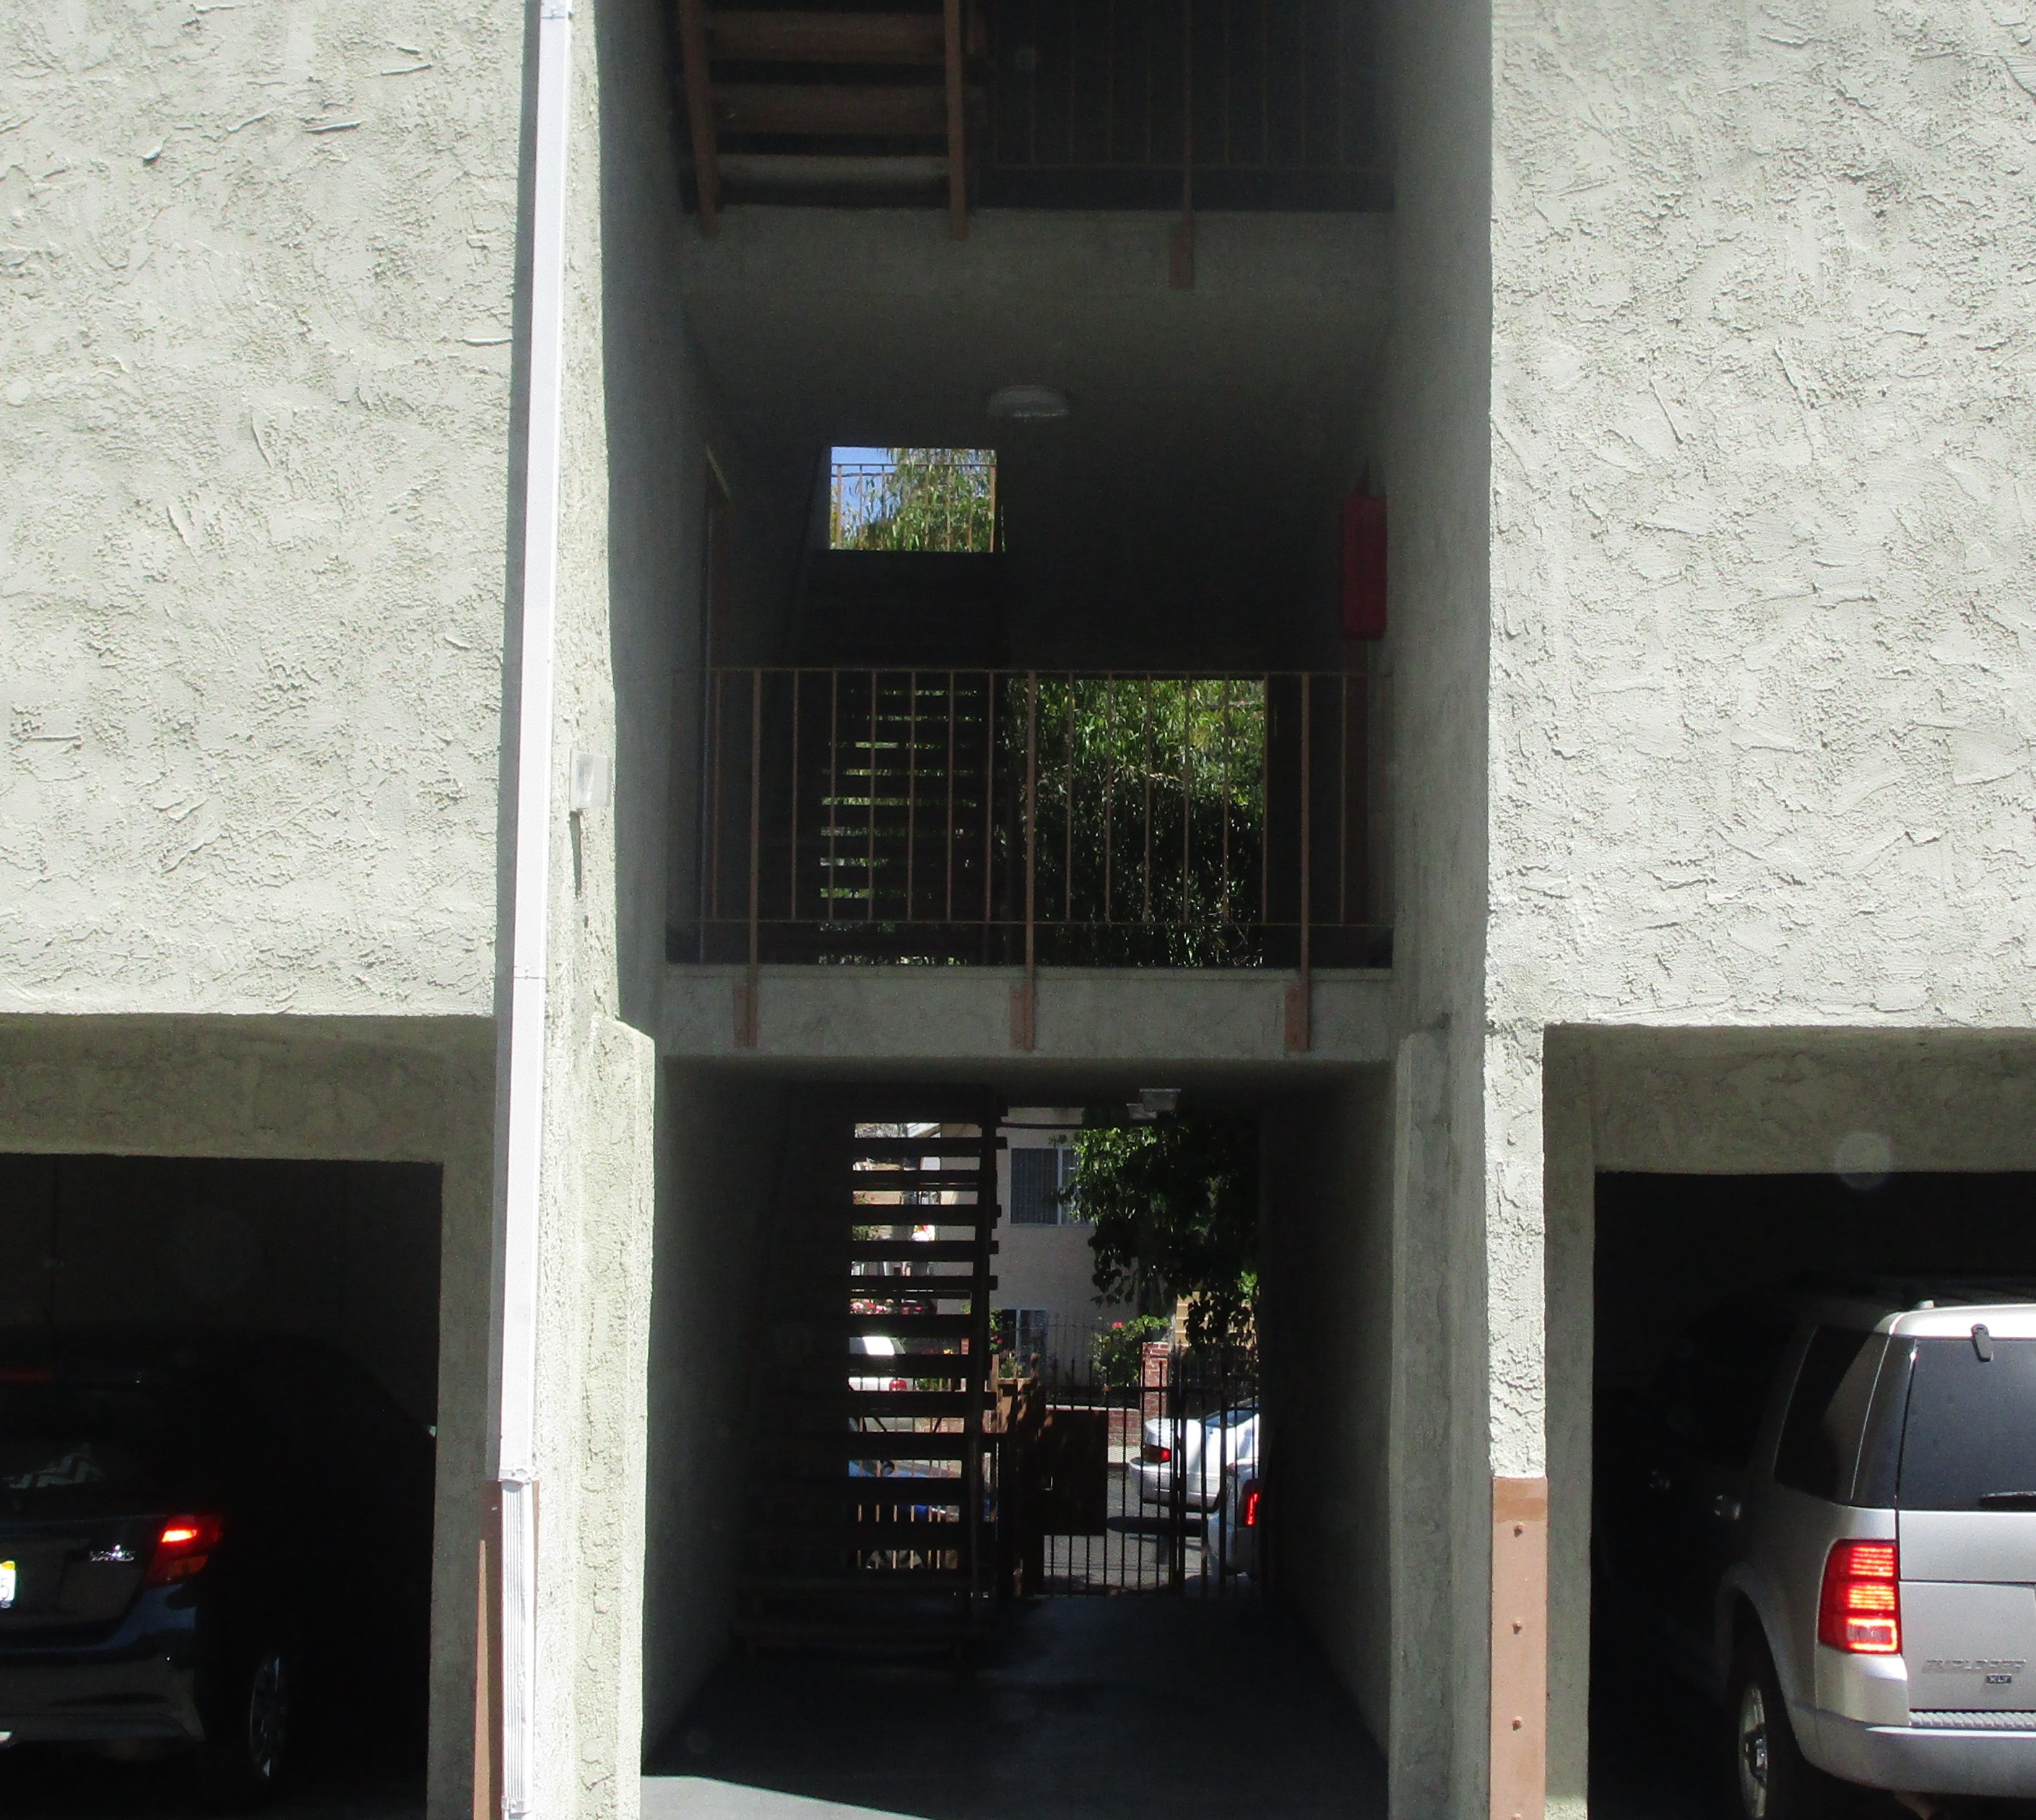 Front view of the parking garage with stairs leading up to the first floor